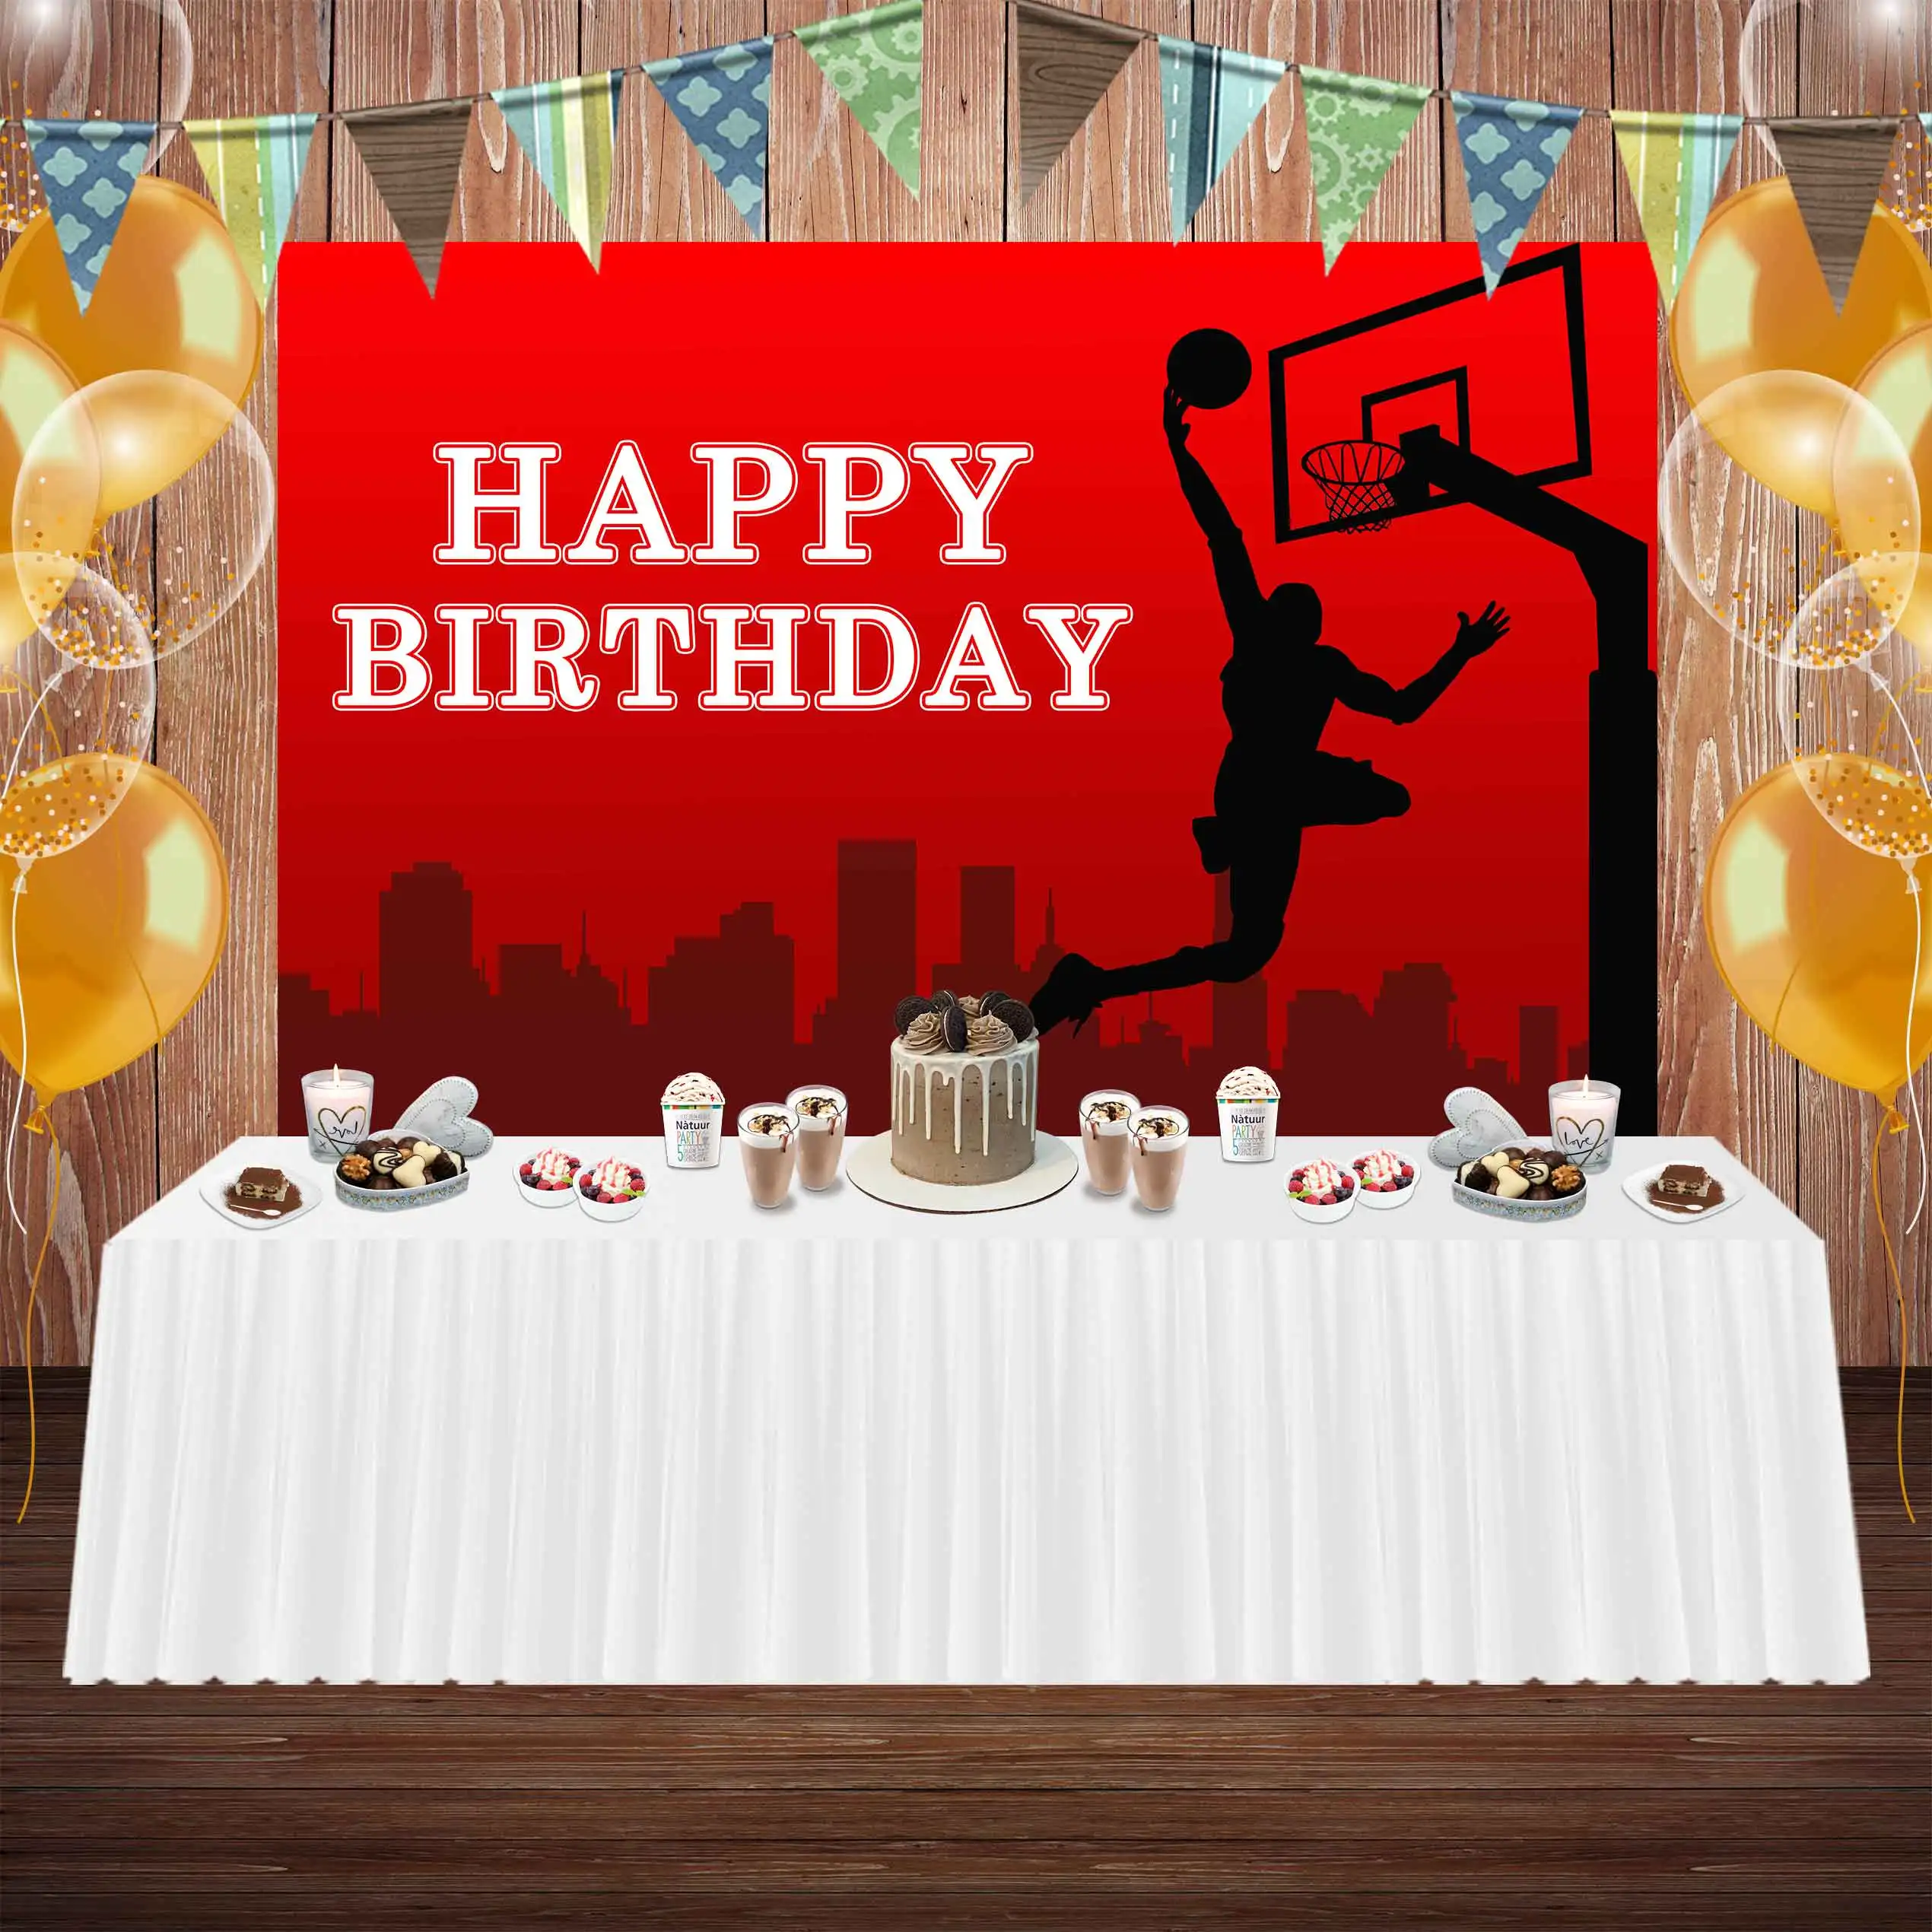 NeoBack Boy Red Party Score Background Baby Shower Photography City Sports Basketball Hoop Happy Birthday Photo Backdrop